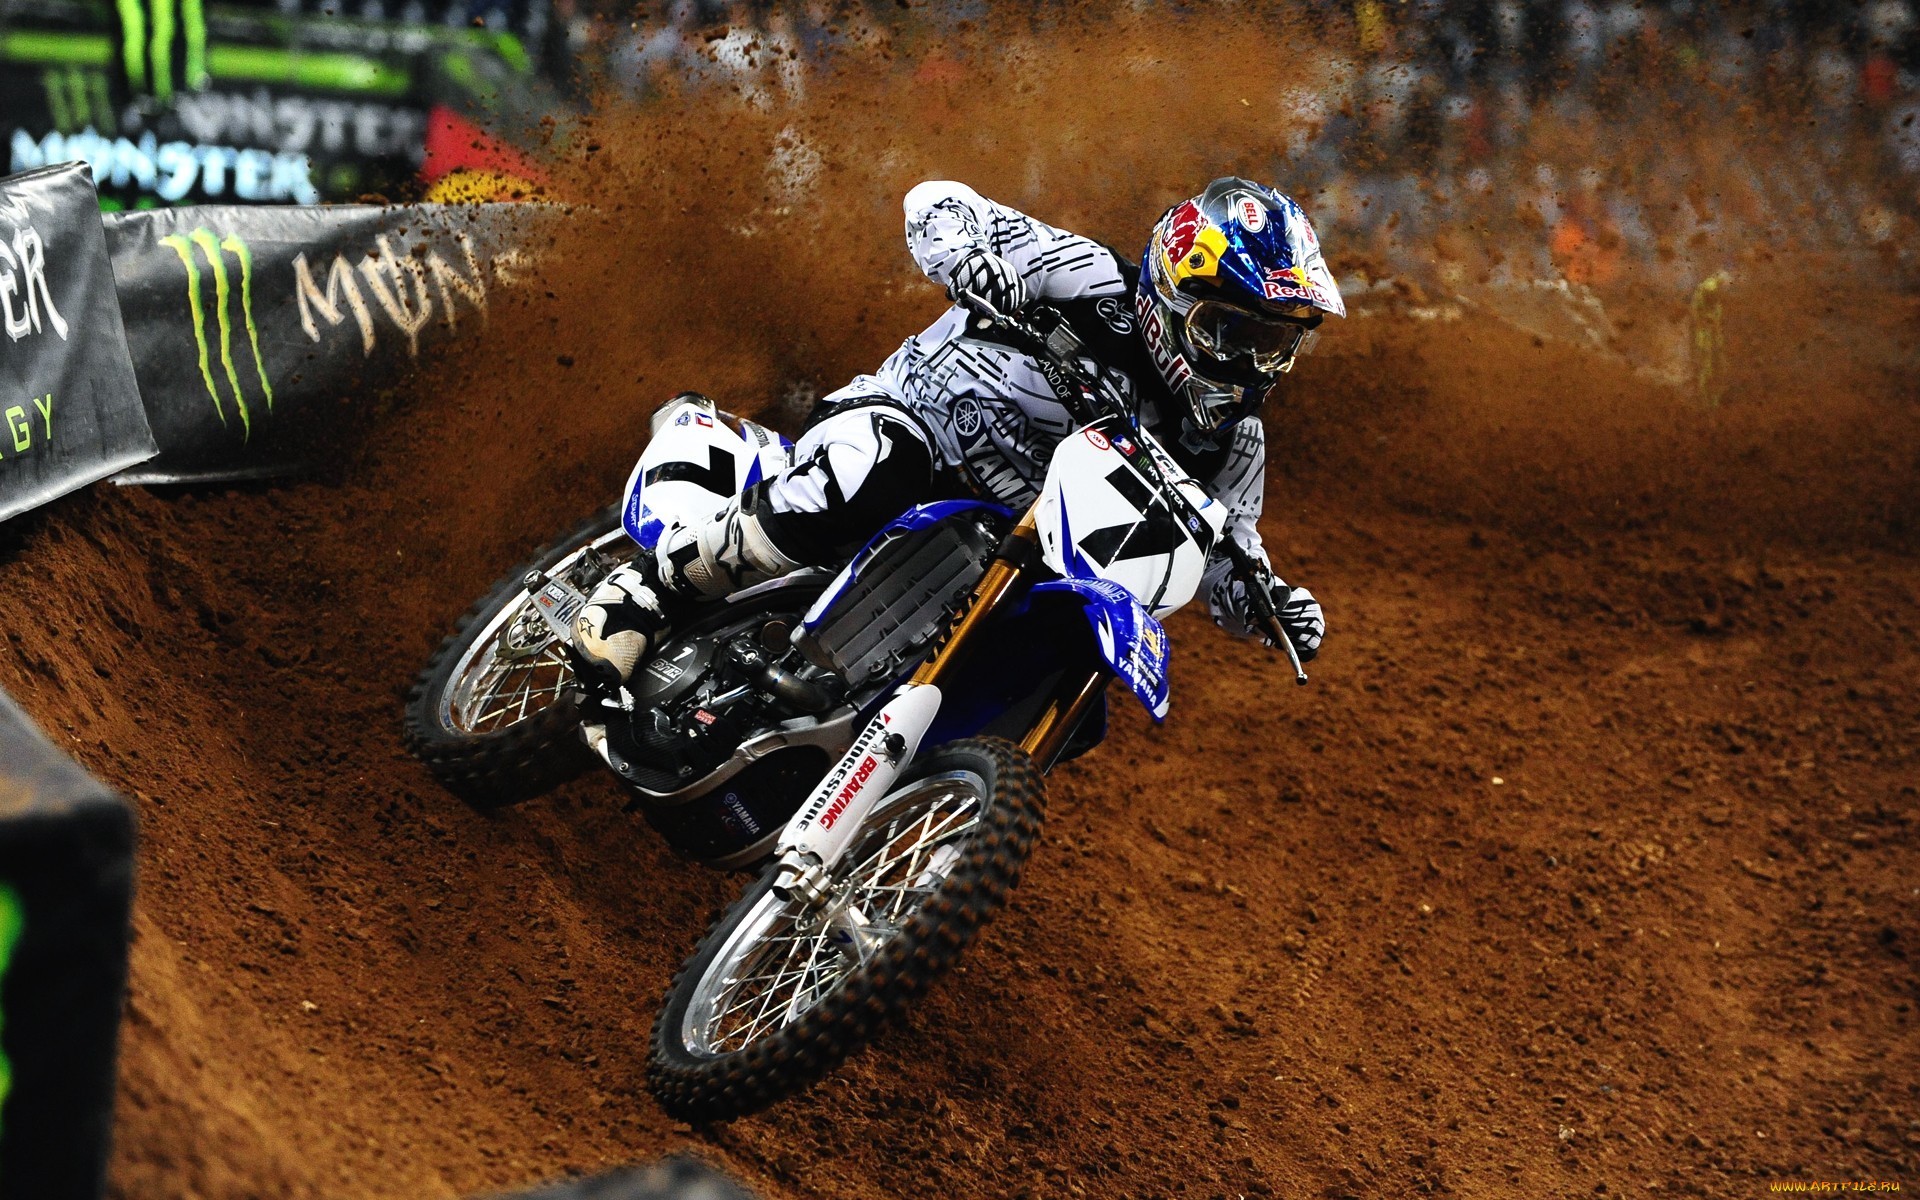 Download "Motocross" wallpapers for